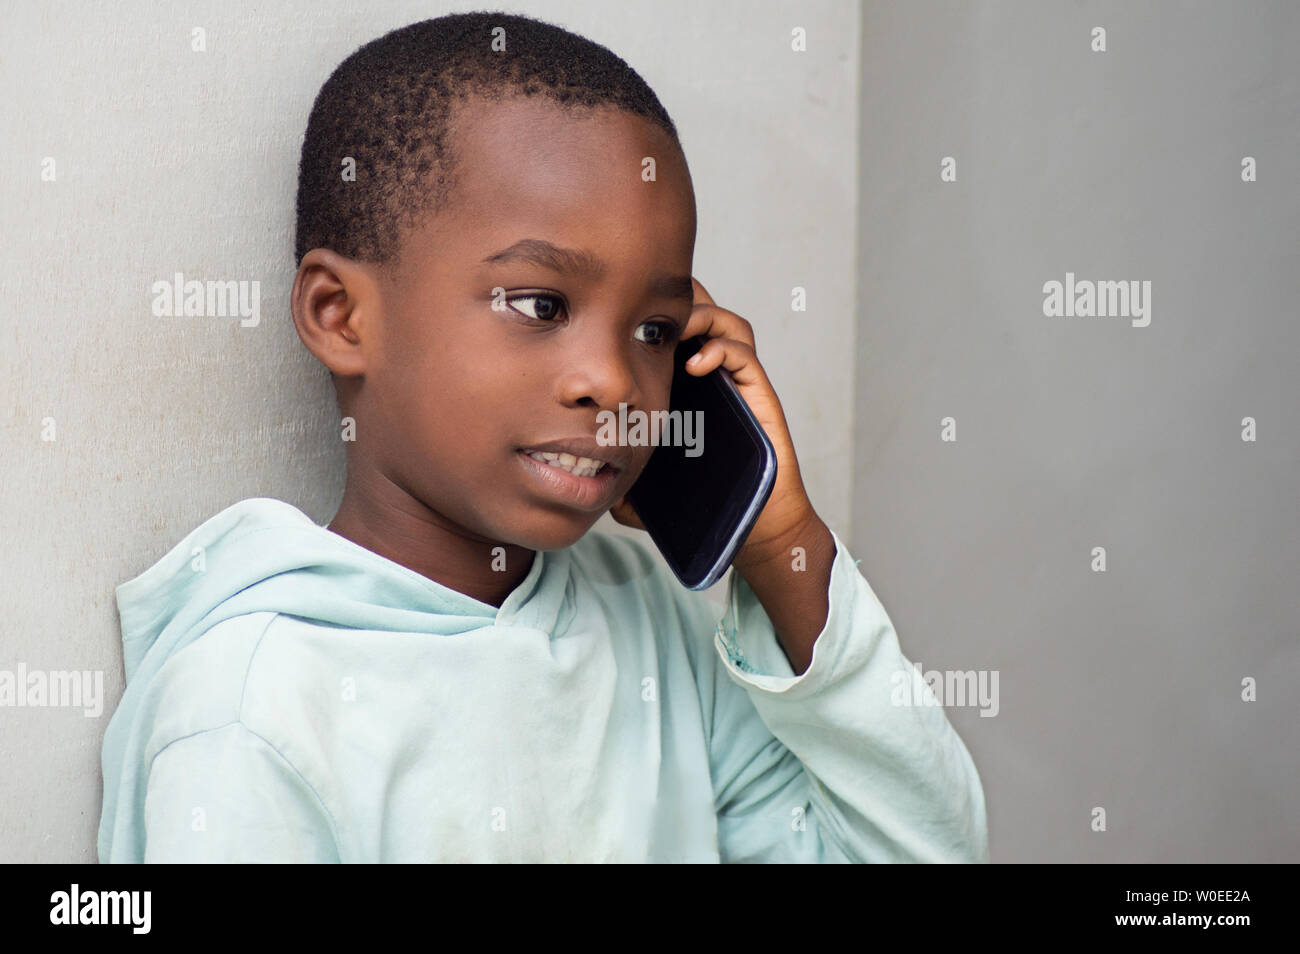 This child on the phone, listening intently his interlocutor. Stock Photo